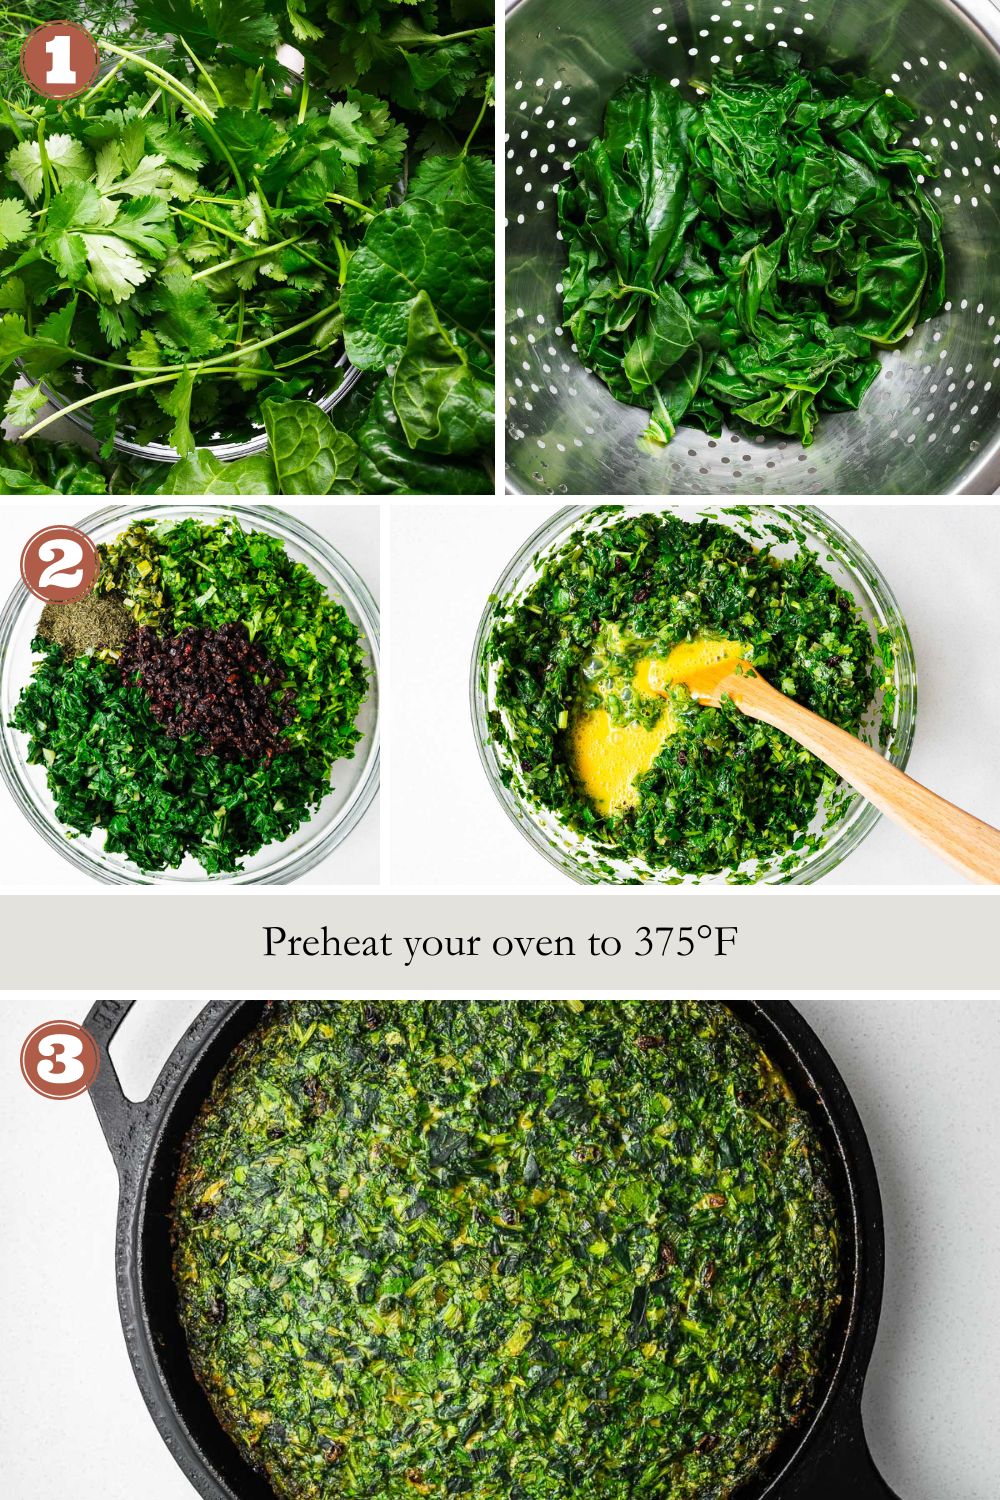 The three steps to make kuku sabzi: prepare ingredients, mix the greens with eggs, and bake in a preheated oven.